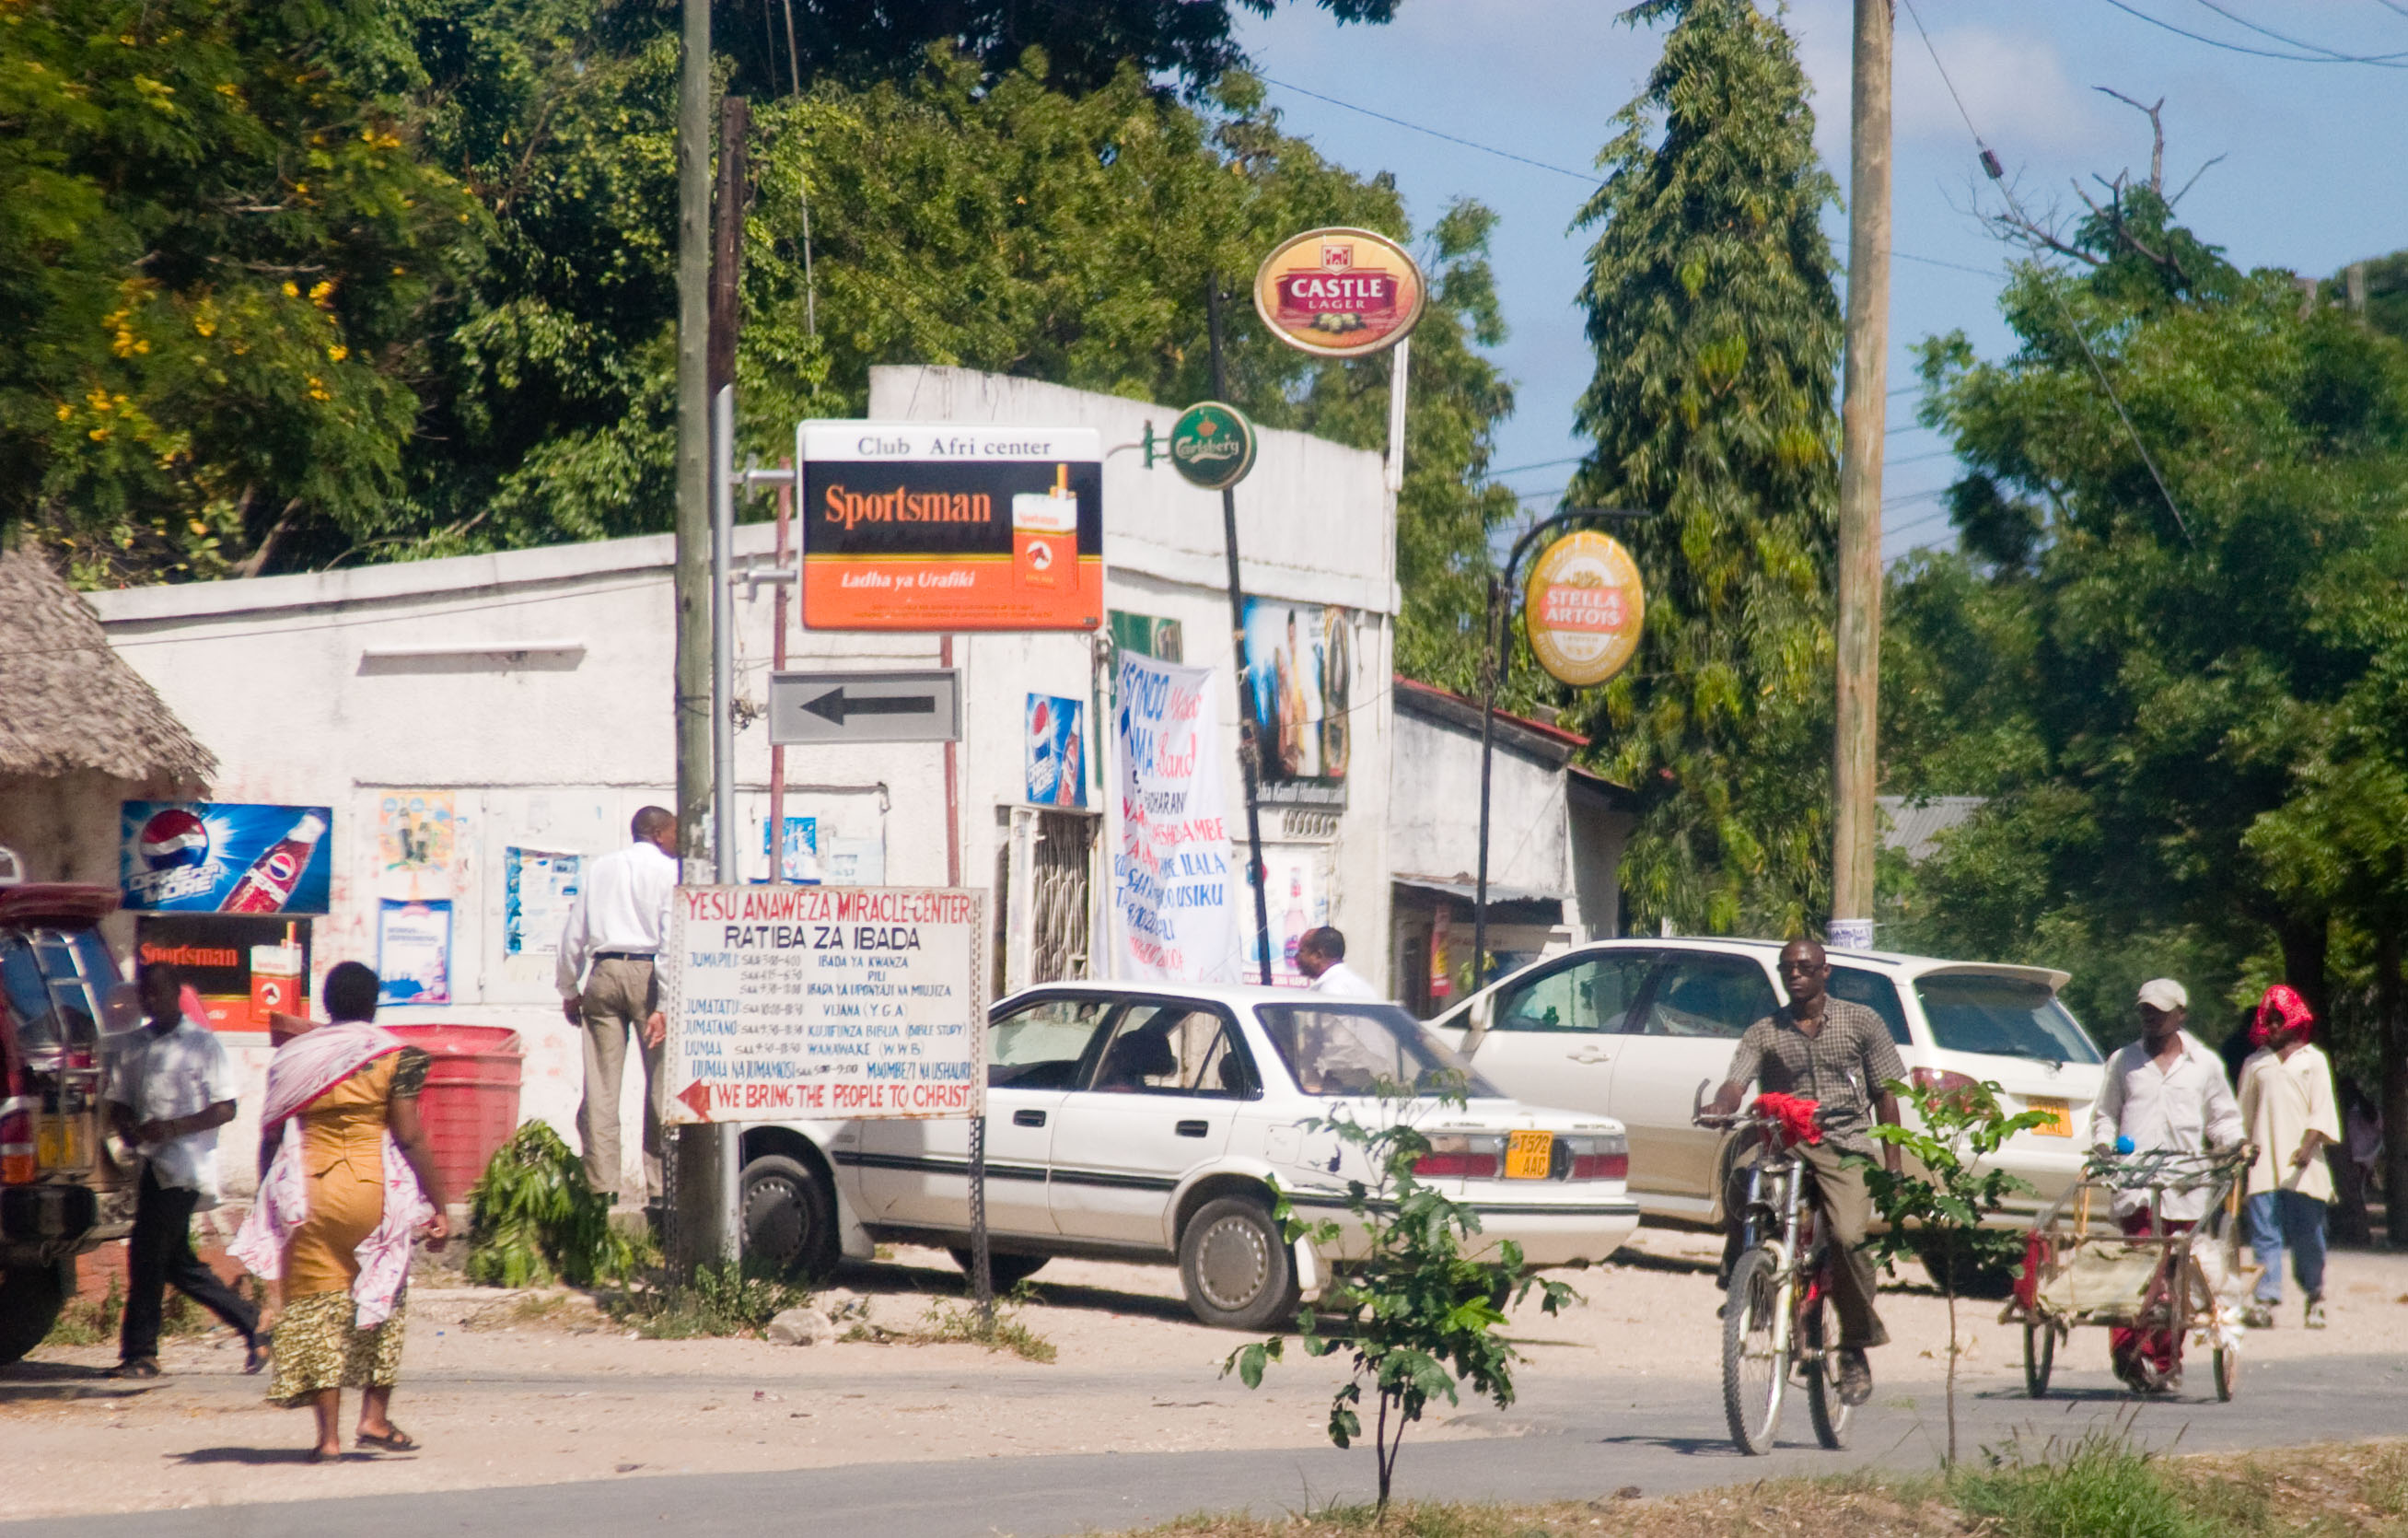 shops in Tanzania with ads for foreign trade marks_Photo by Jon Wiley on Flickr.com